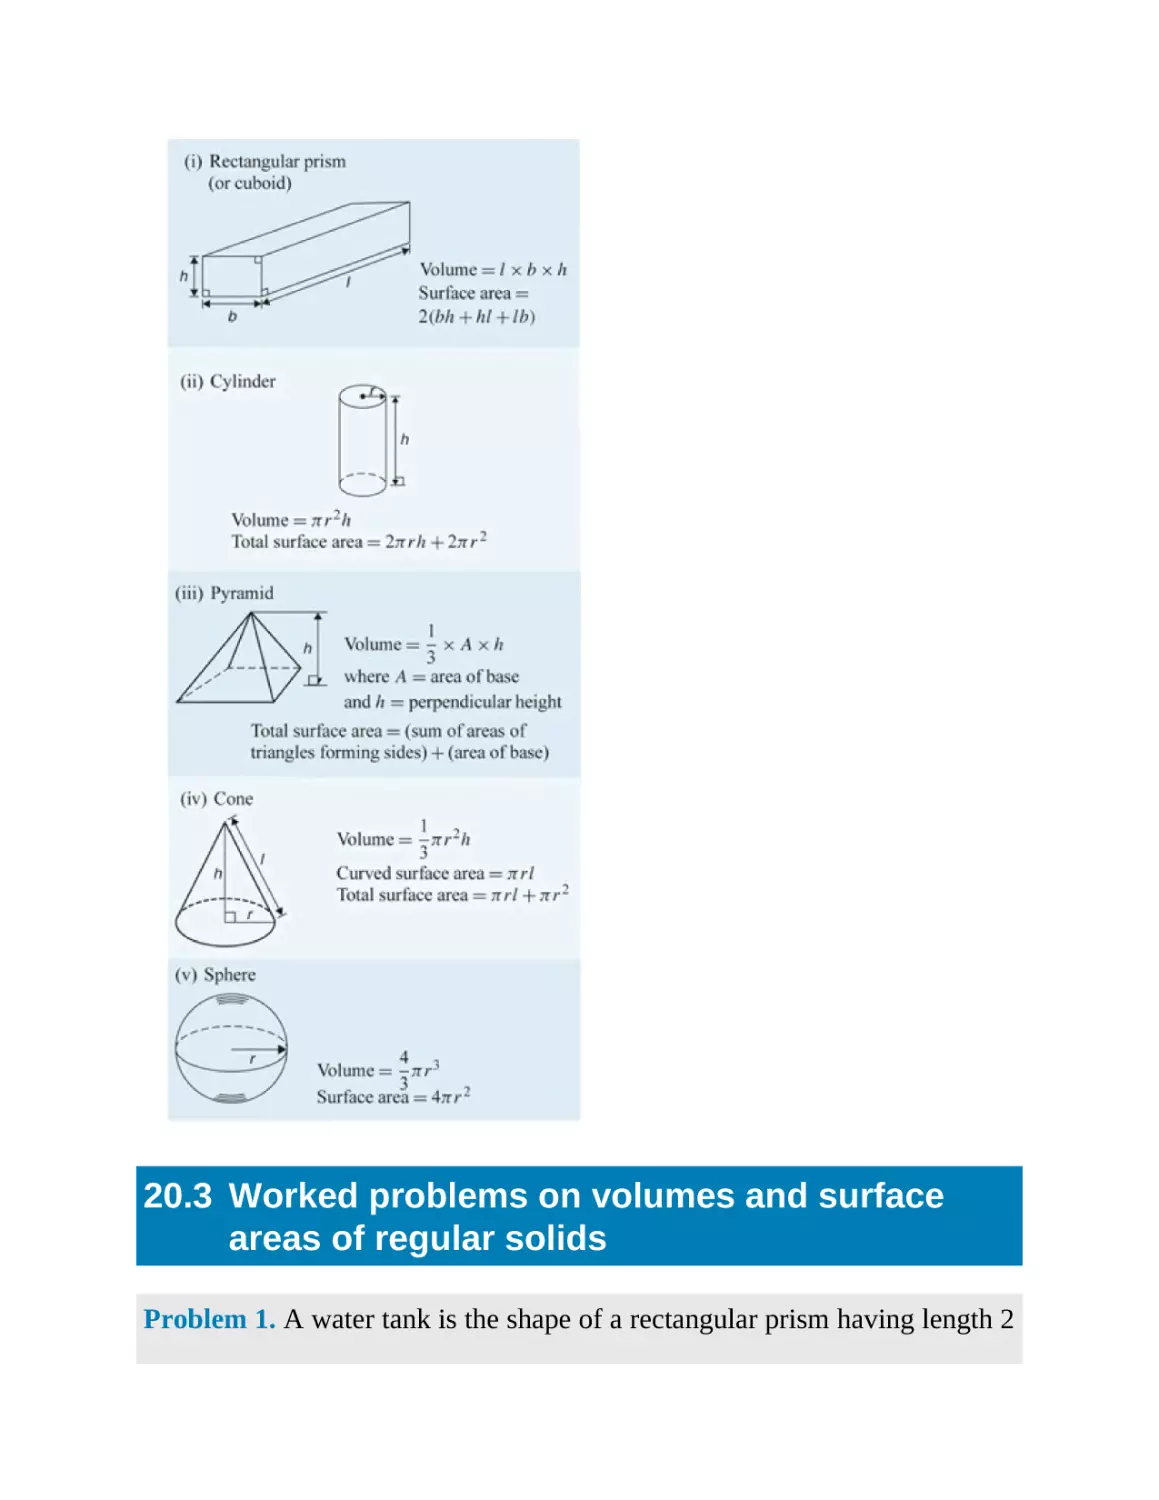 20.3 Worked problems on volumes and surface areas of regular solids